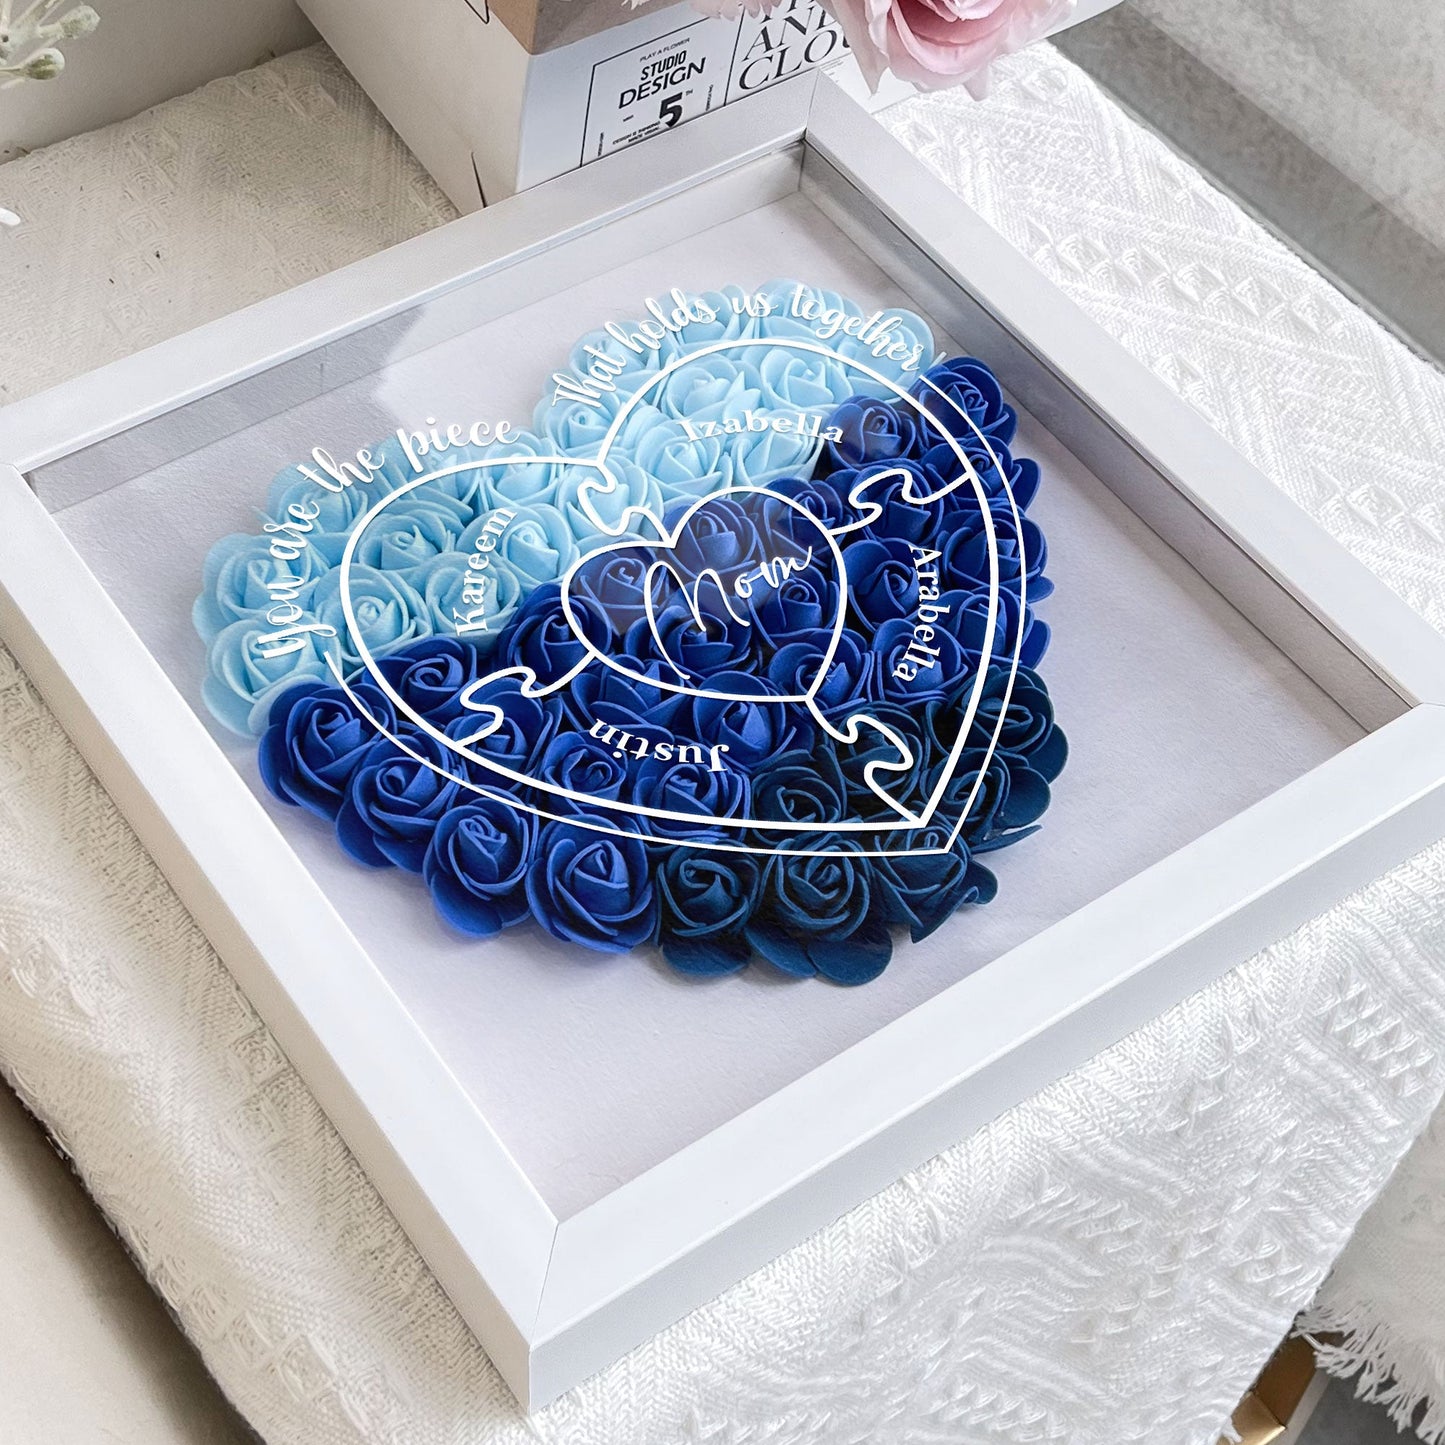 You Are The Piece That Hold Us Together - Personalized Flower Shadow Box